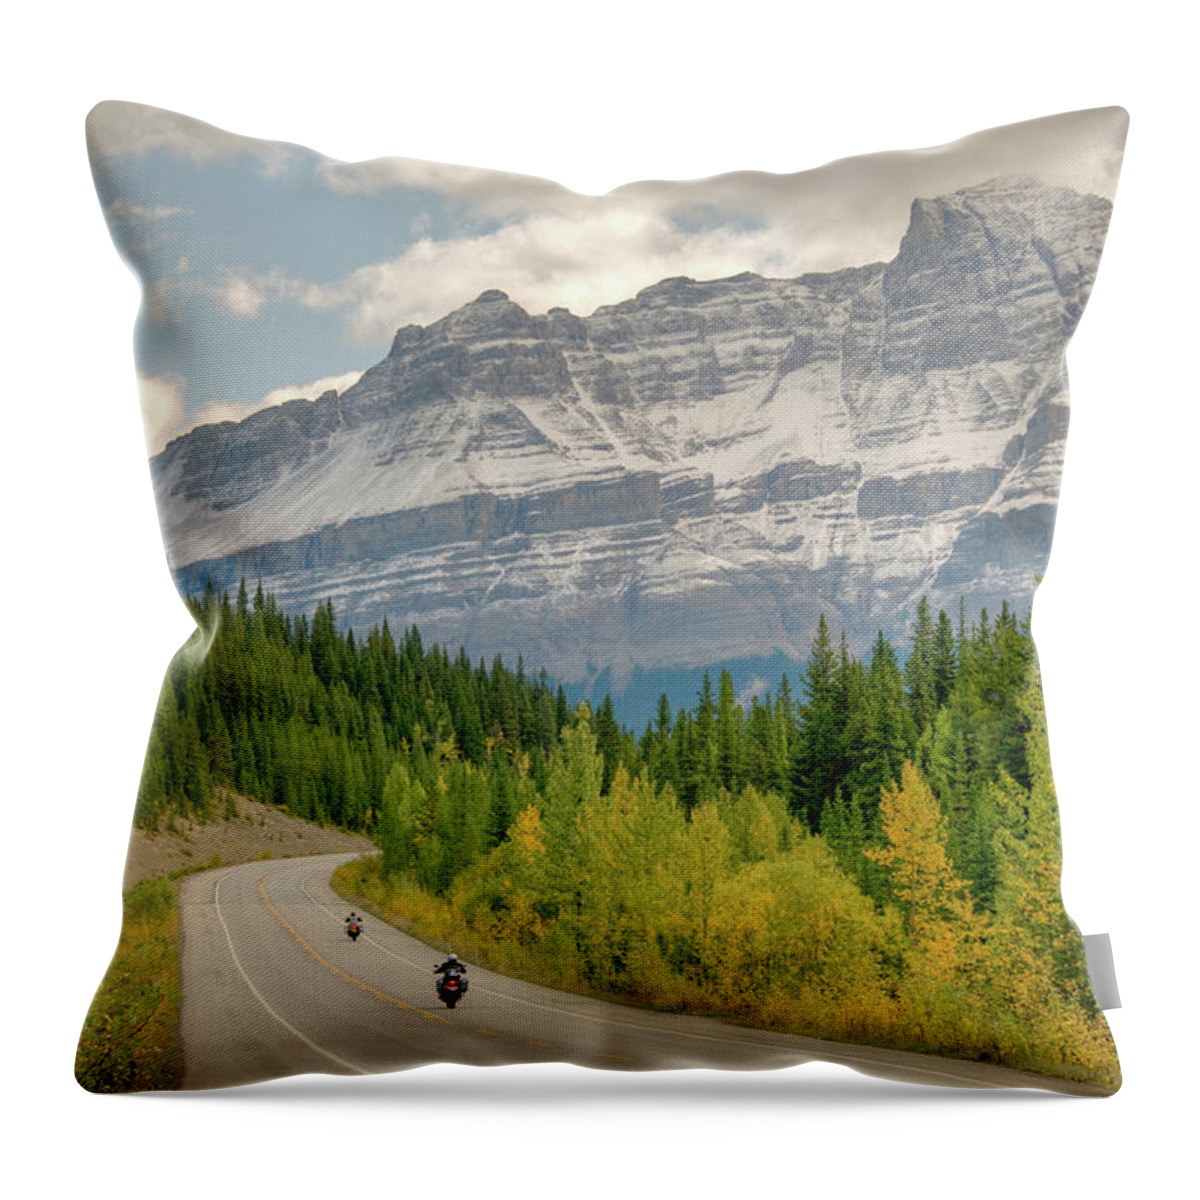 Scenics Throw Pillow featuring the photograph Winding Highway With Mountain View by Wildroze